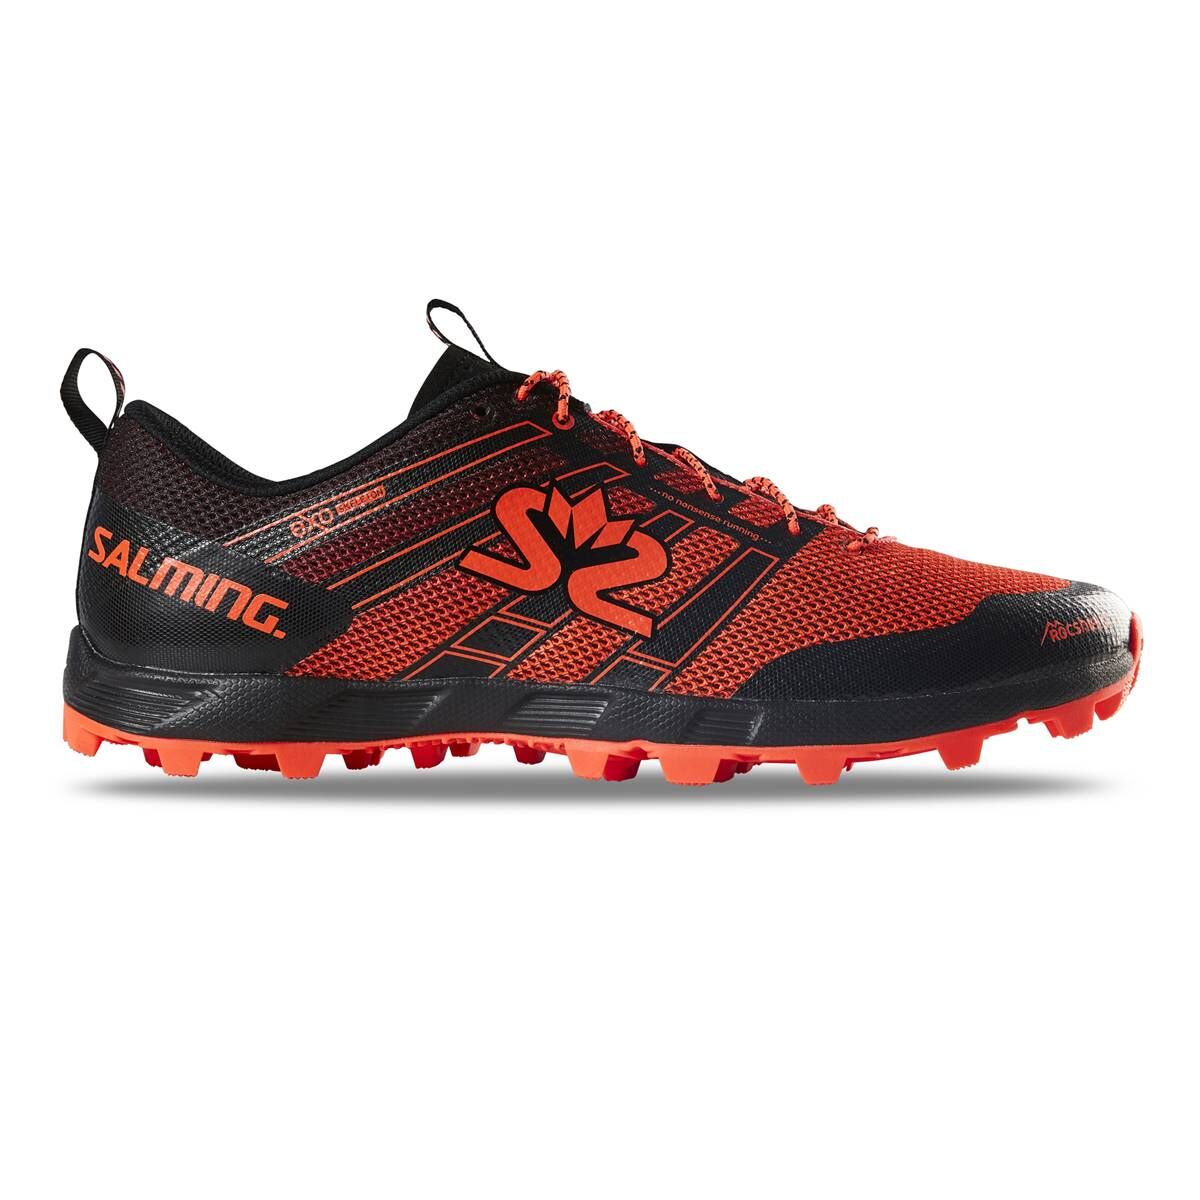 Salming Elements 3 - Trail Running shoes - Men's